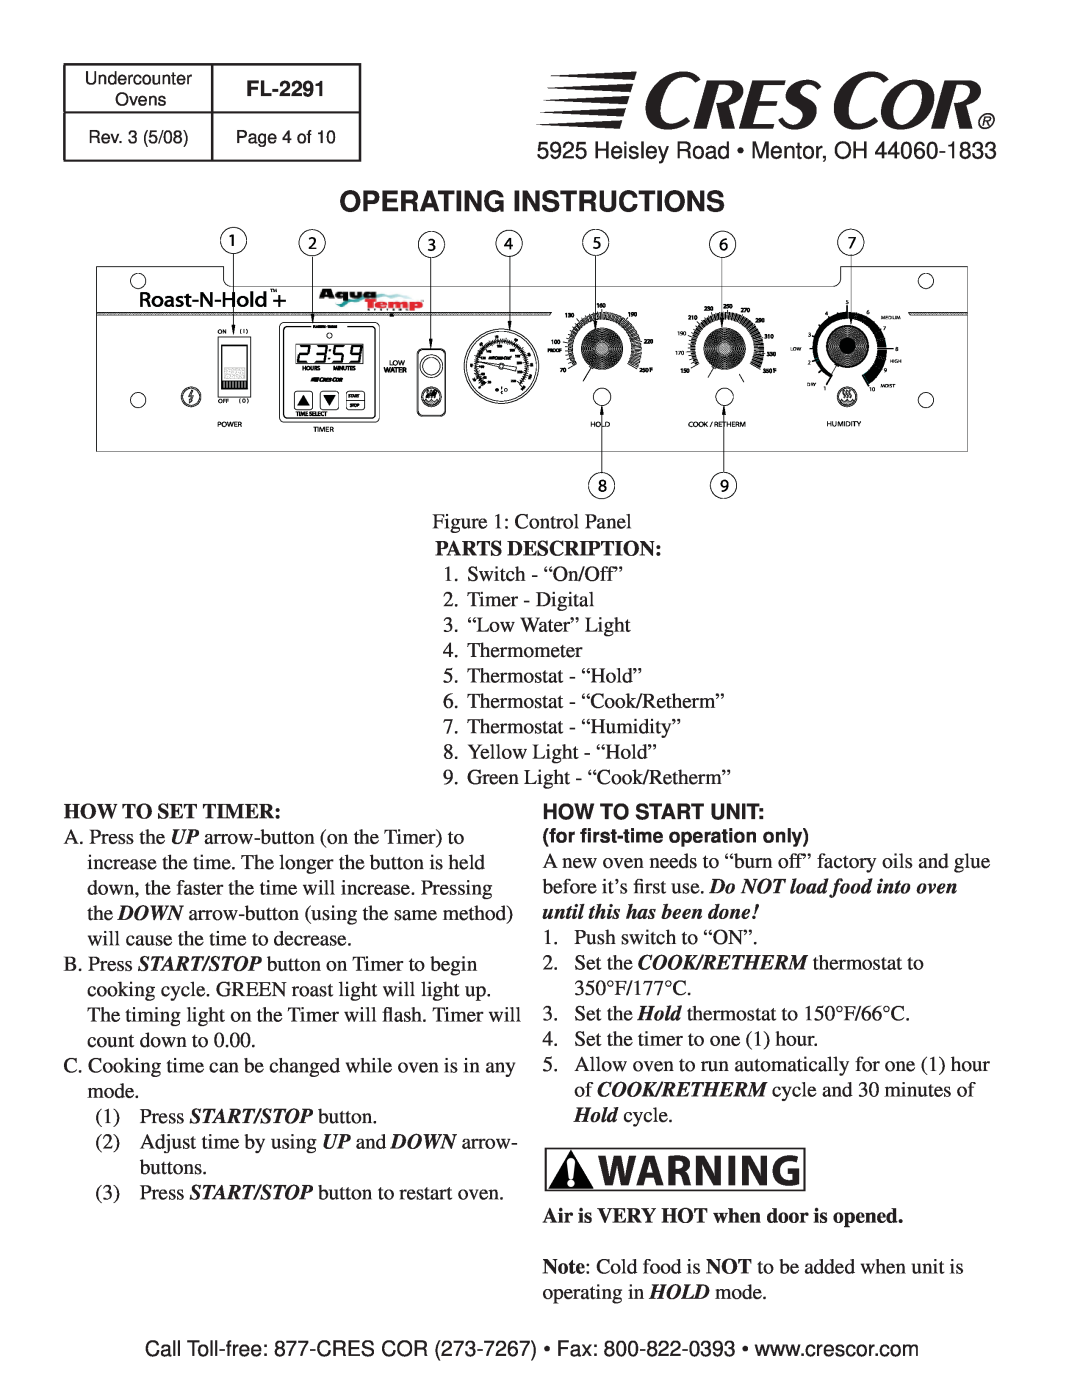 Cres Cor FL-2291 Operating Instructions, Heisley Road Mentor, OH, Roast-N-Hold +, Parts Description, How To Set Timer 